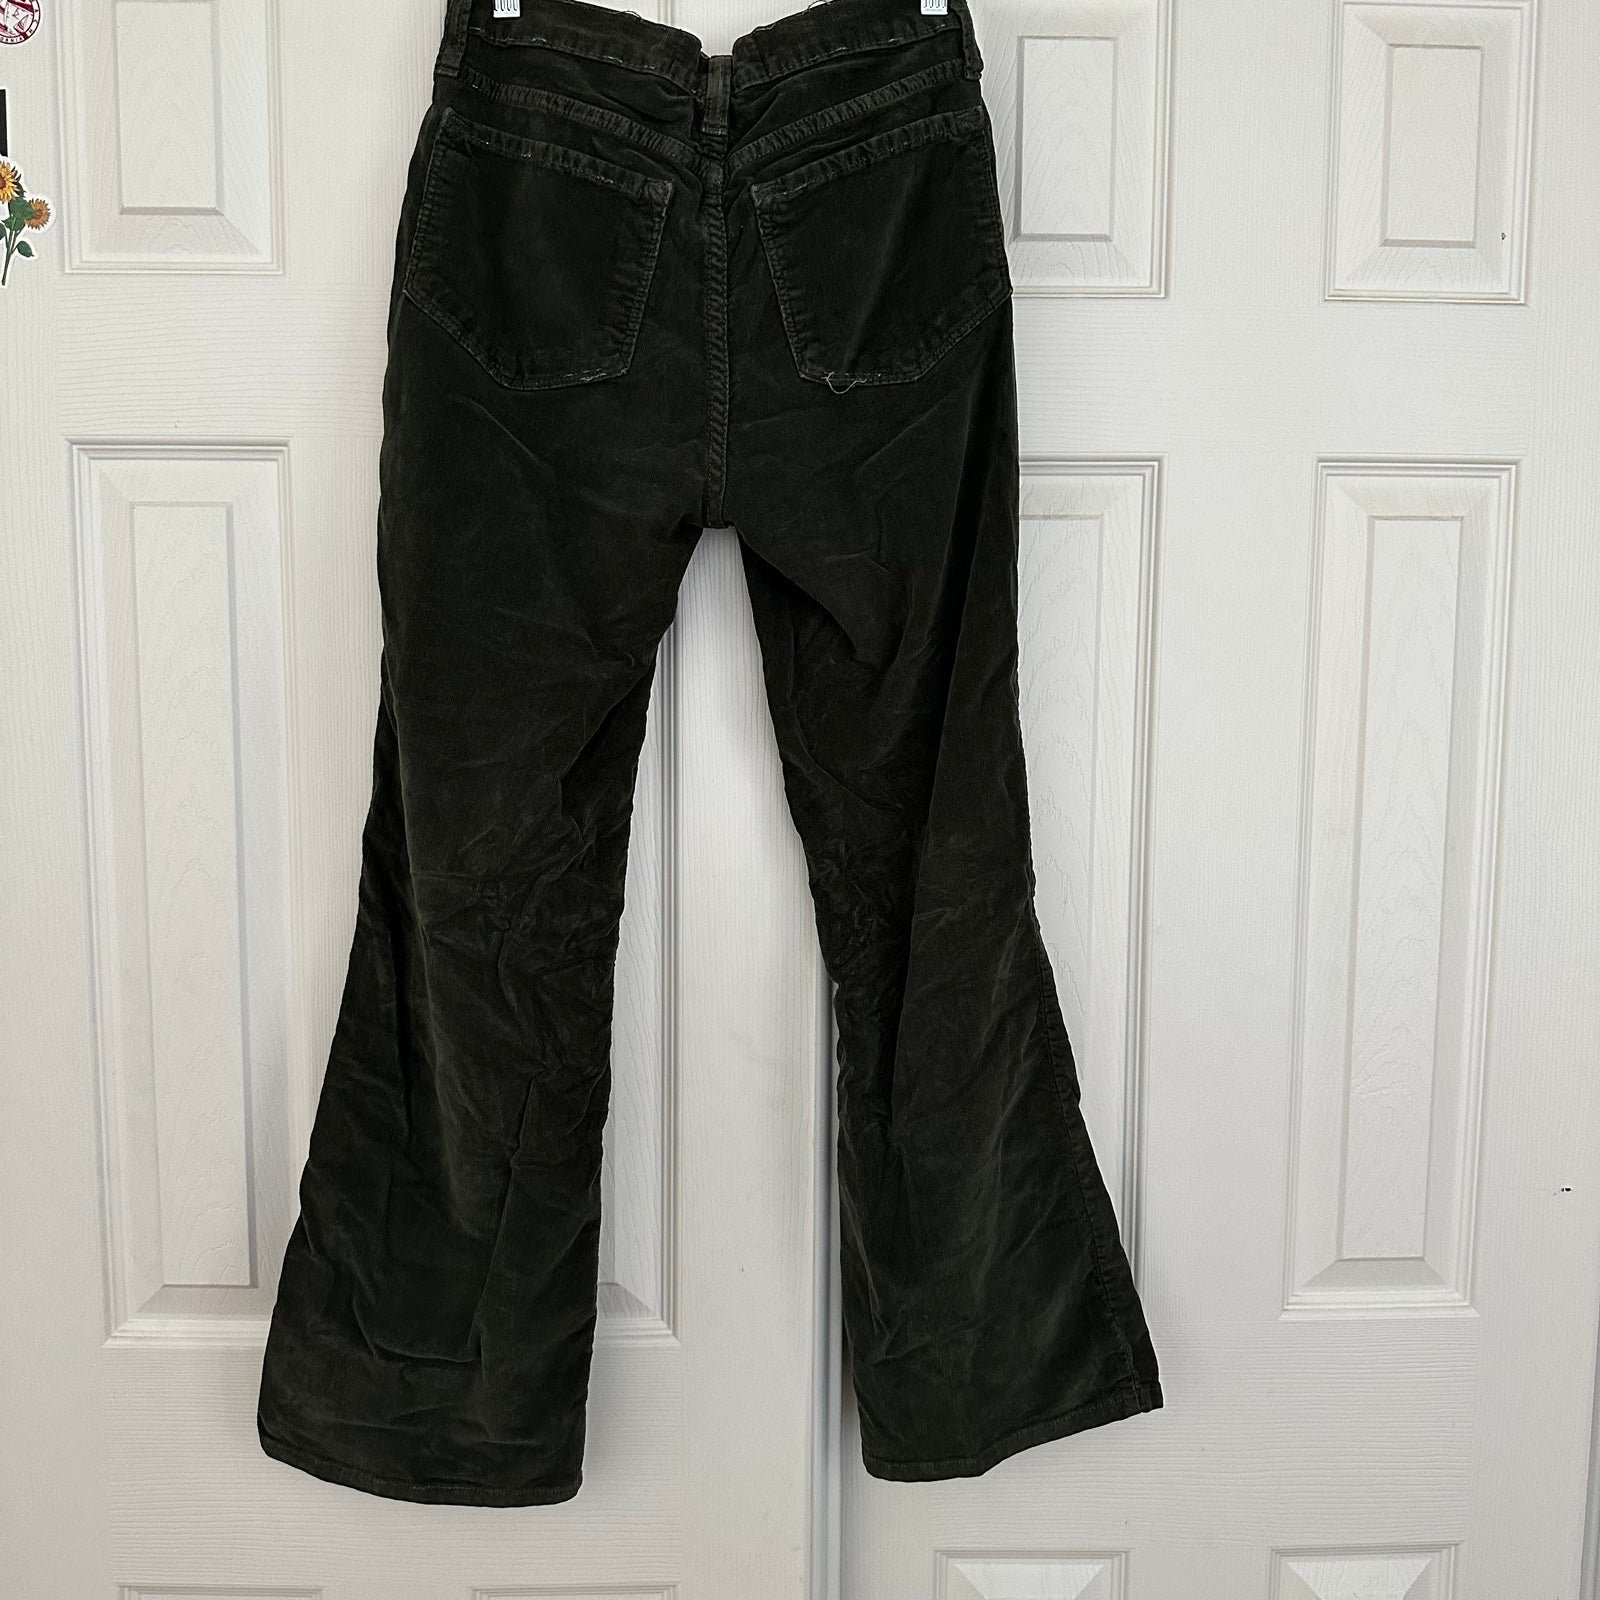 high discount corduroy green pants ghfYiAzvx Everyday Low Prices